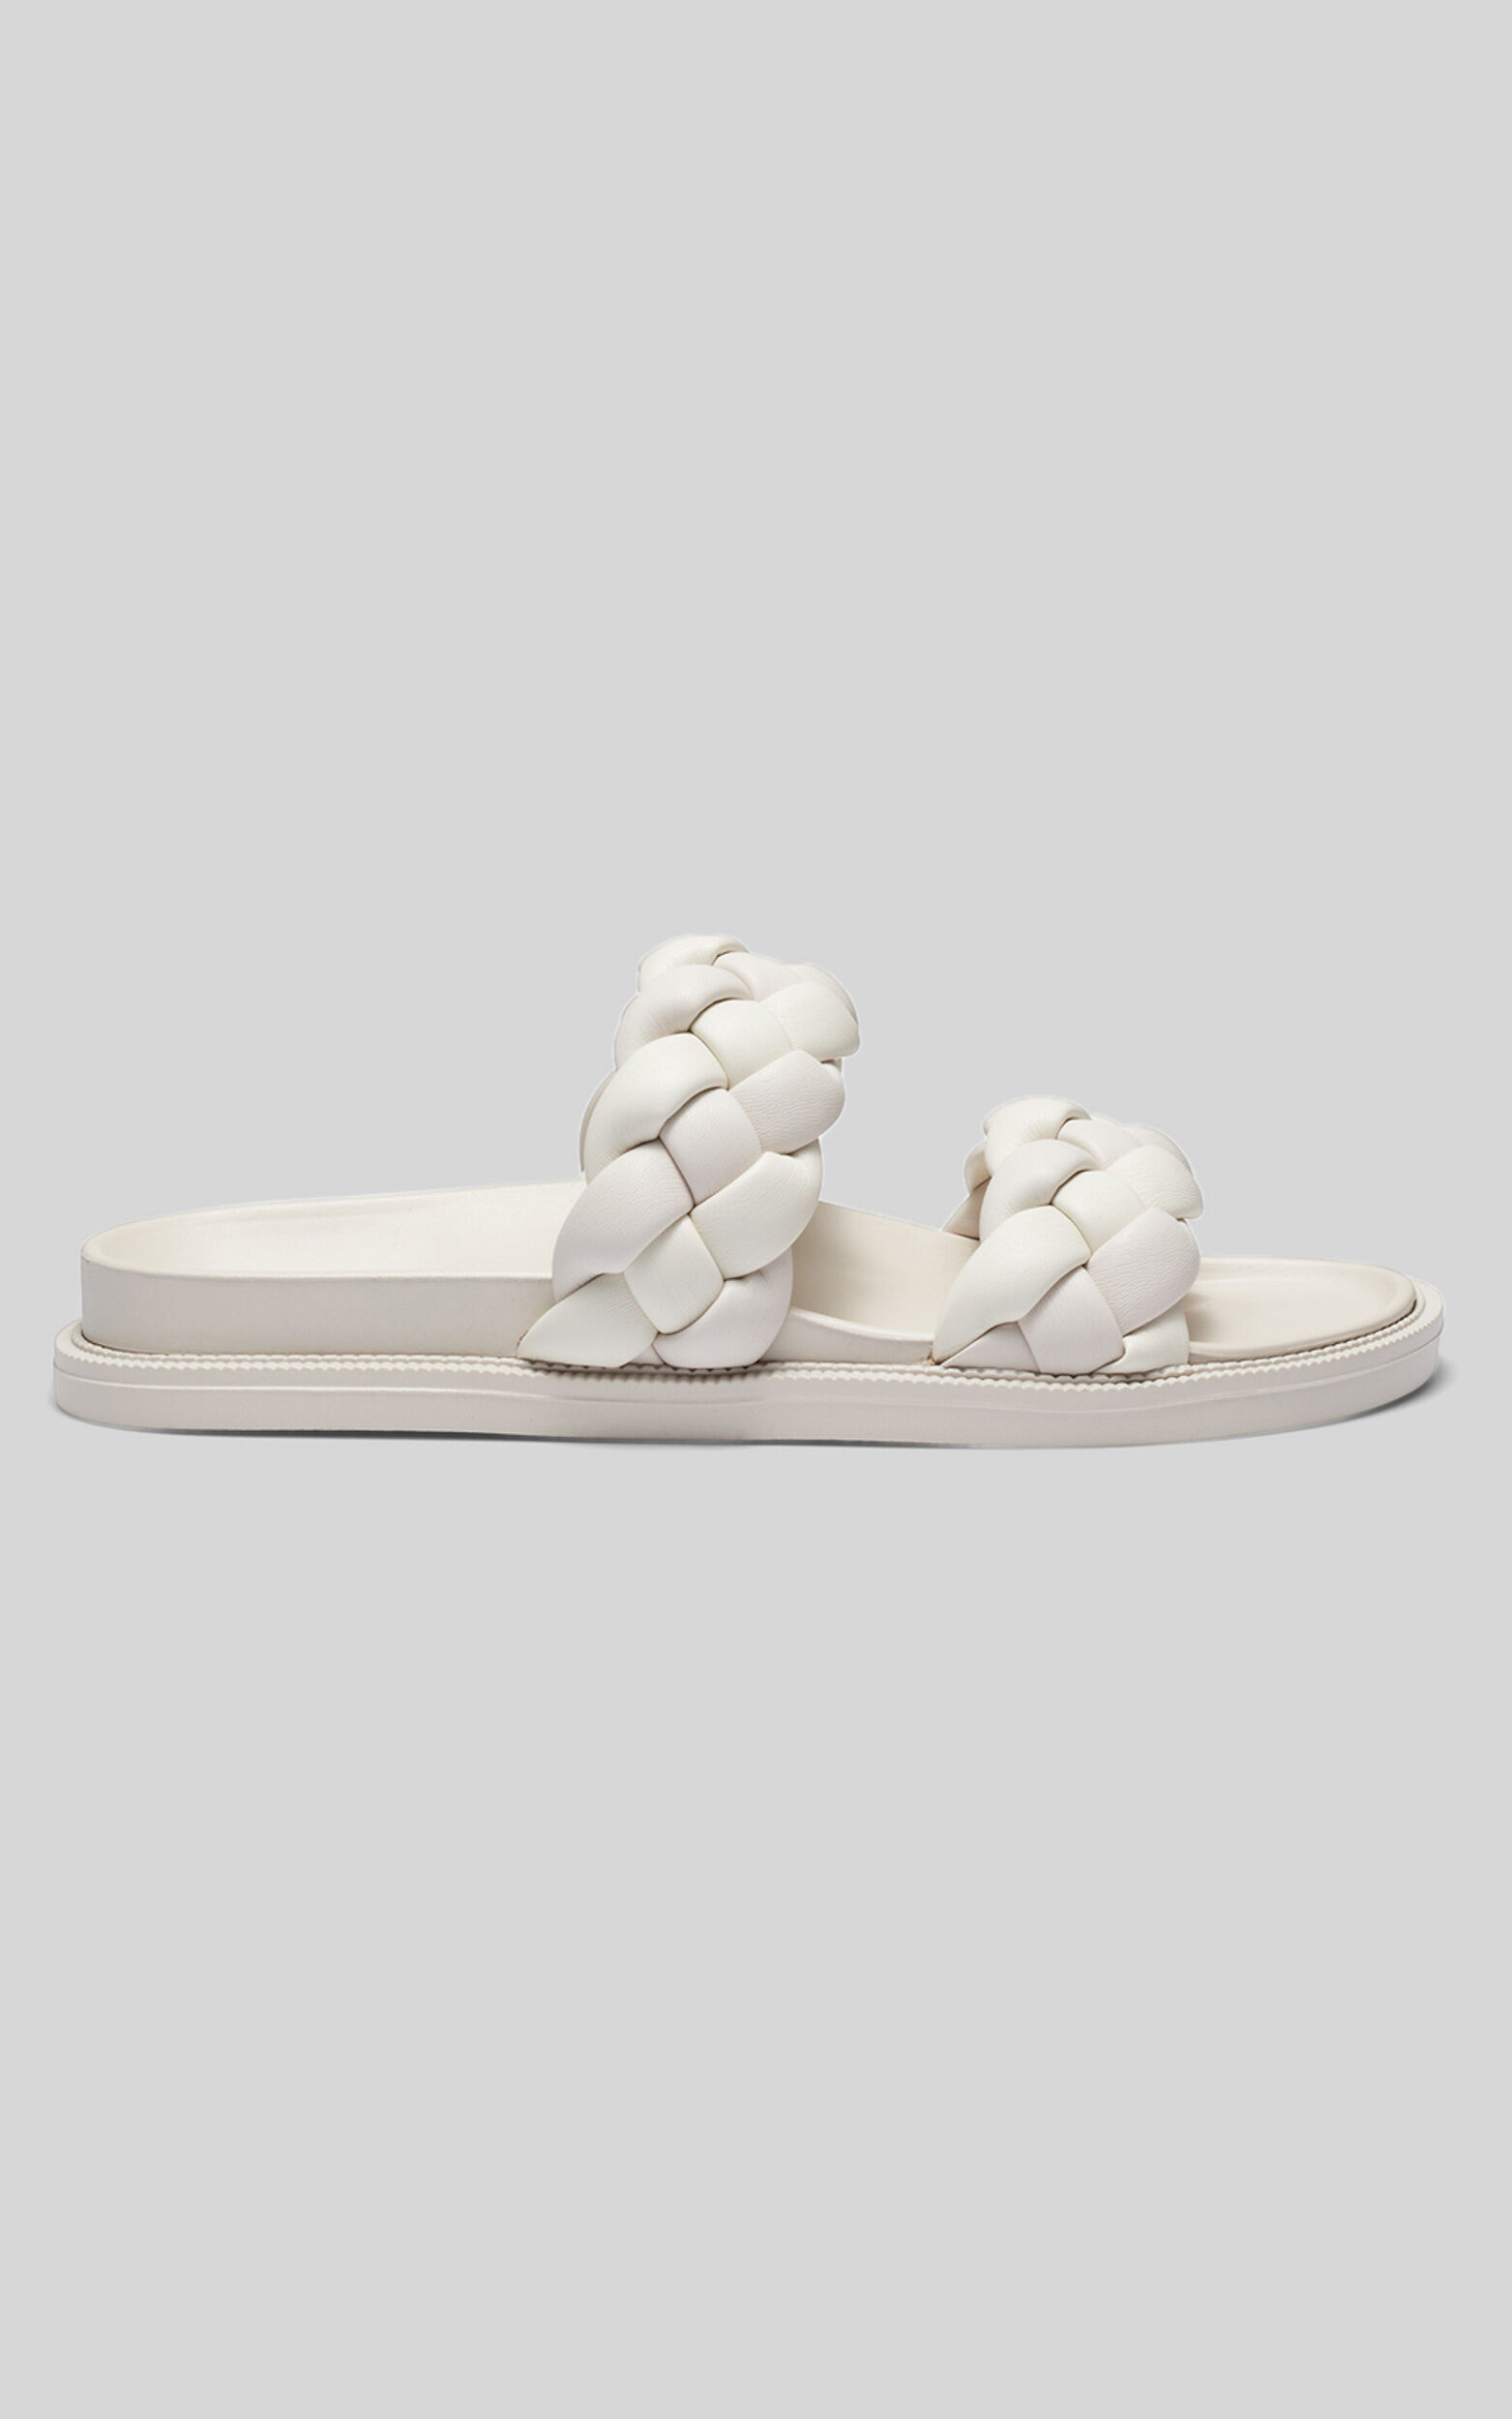 Therapy - Elle Sandals in Bone Tonal - 06, WHT2